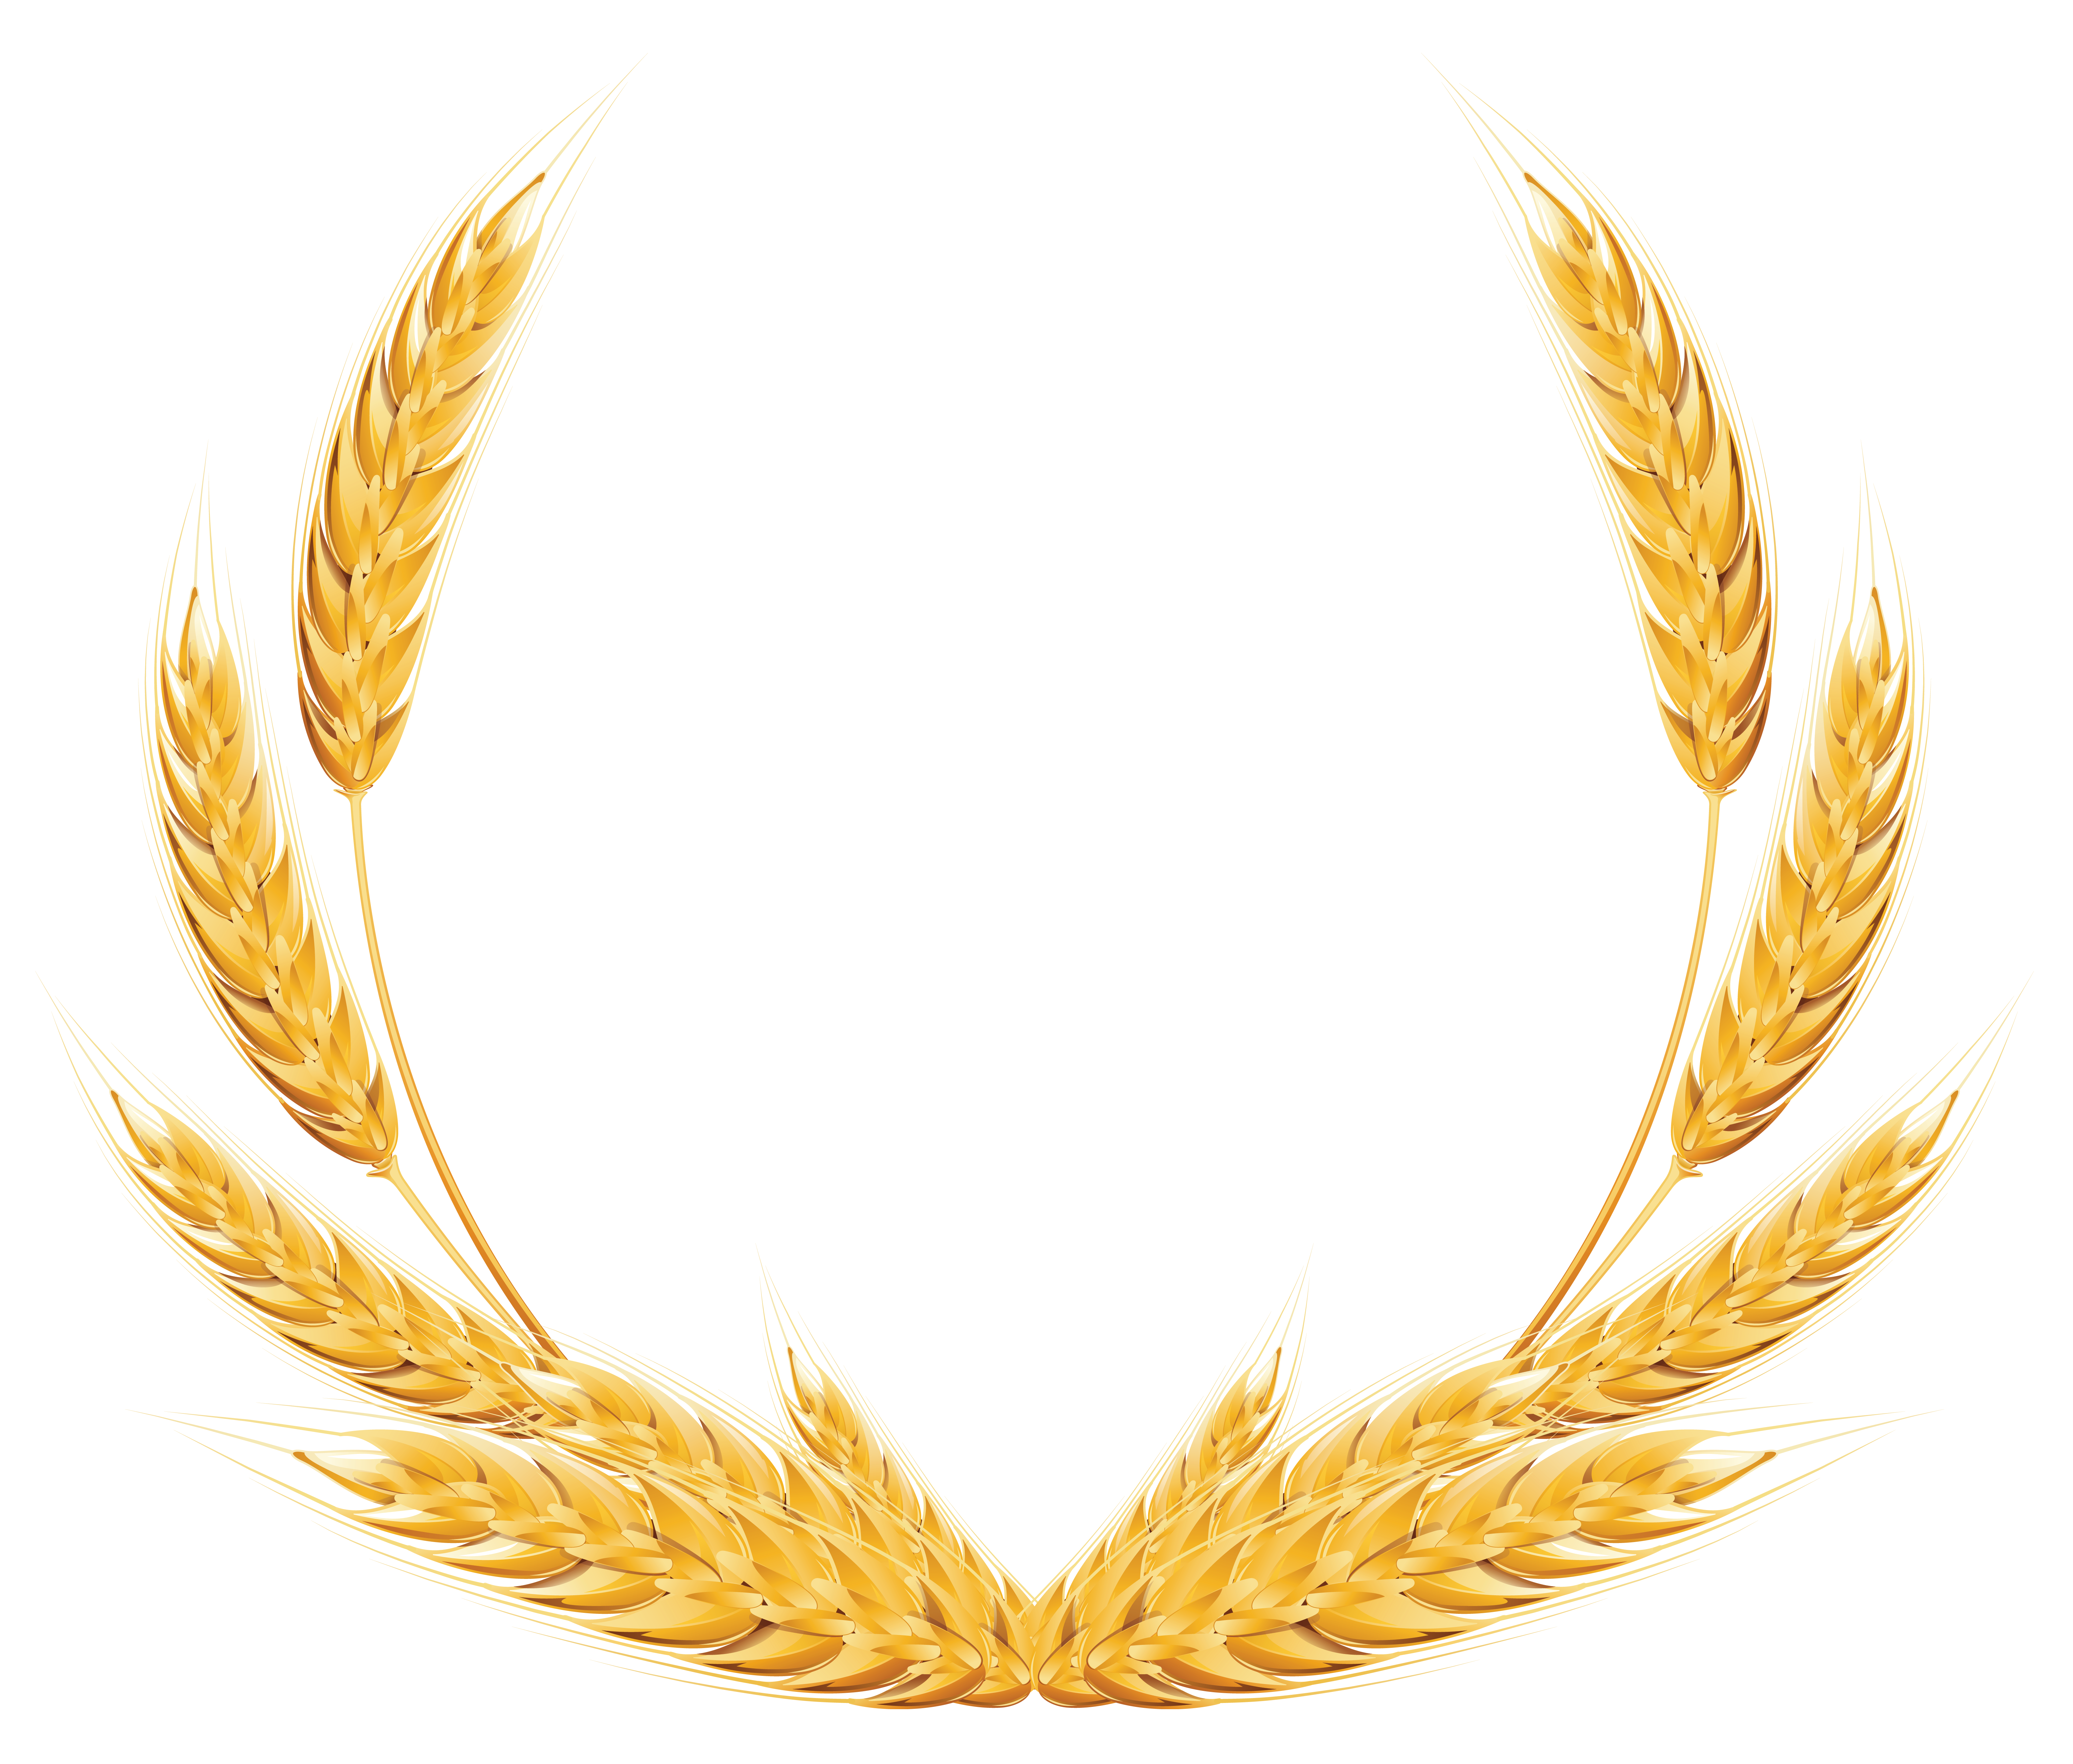 free clipart images wheat - photo #8